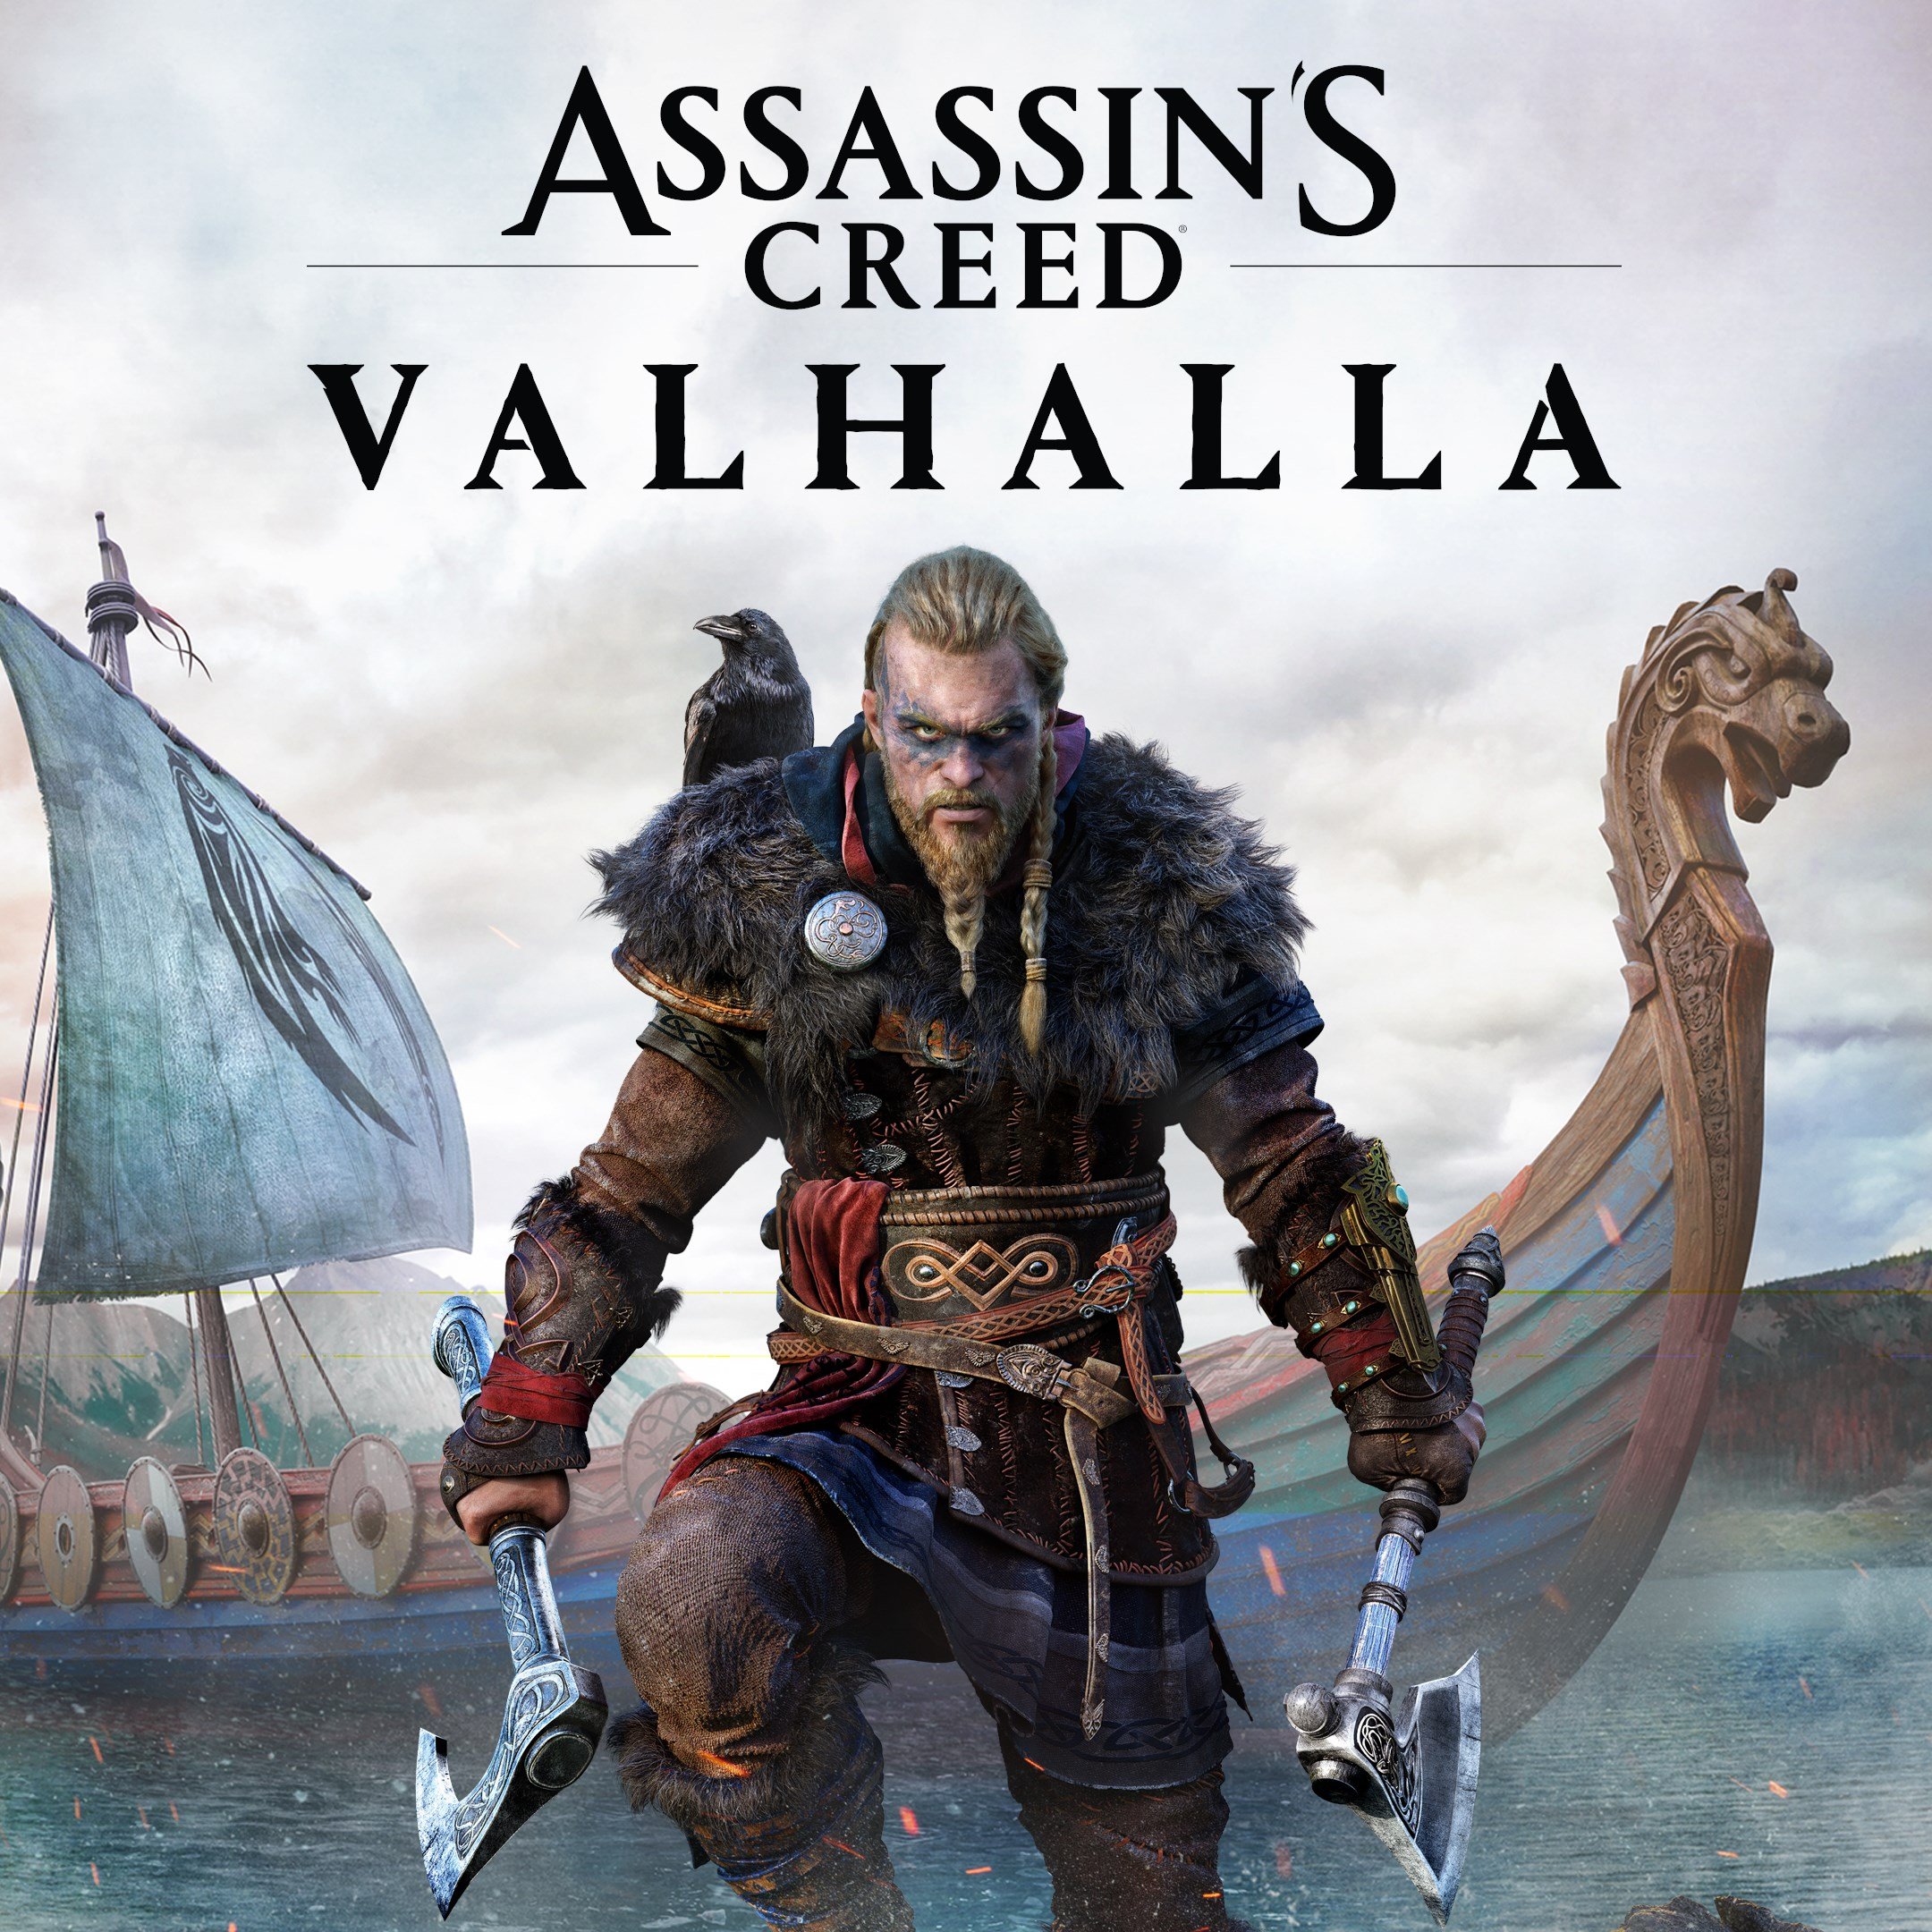 Boxart for Assassin's Creed Valhalla